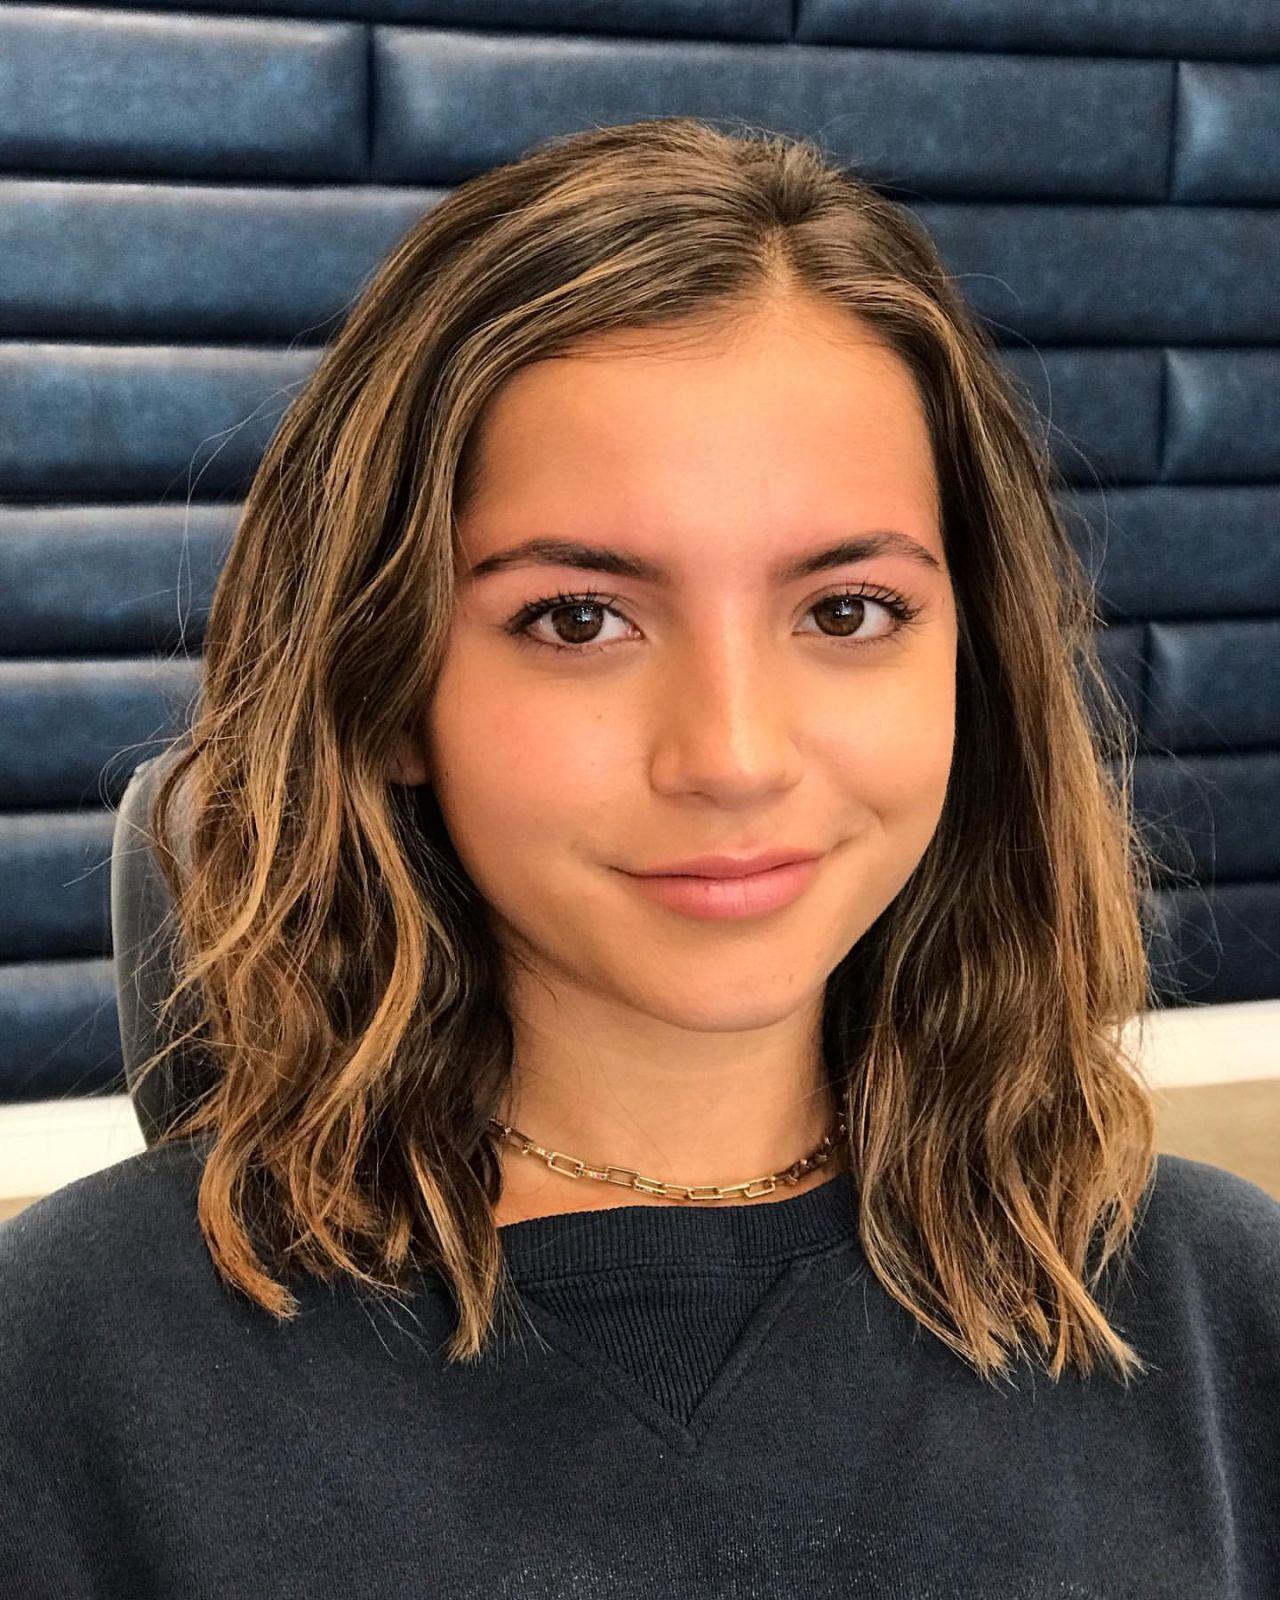 70+ Hot Pictures Of Isabela Moner Which Will Rock Your World 129